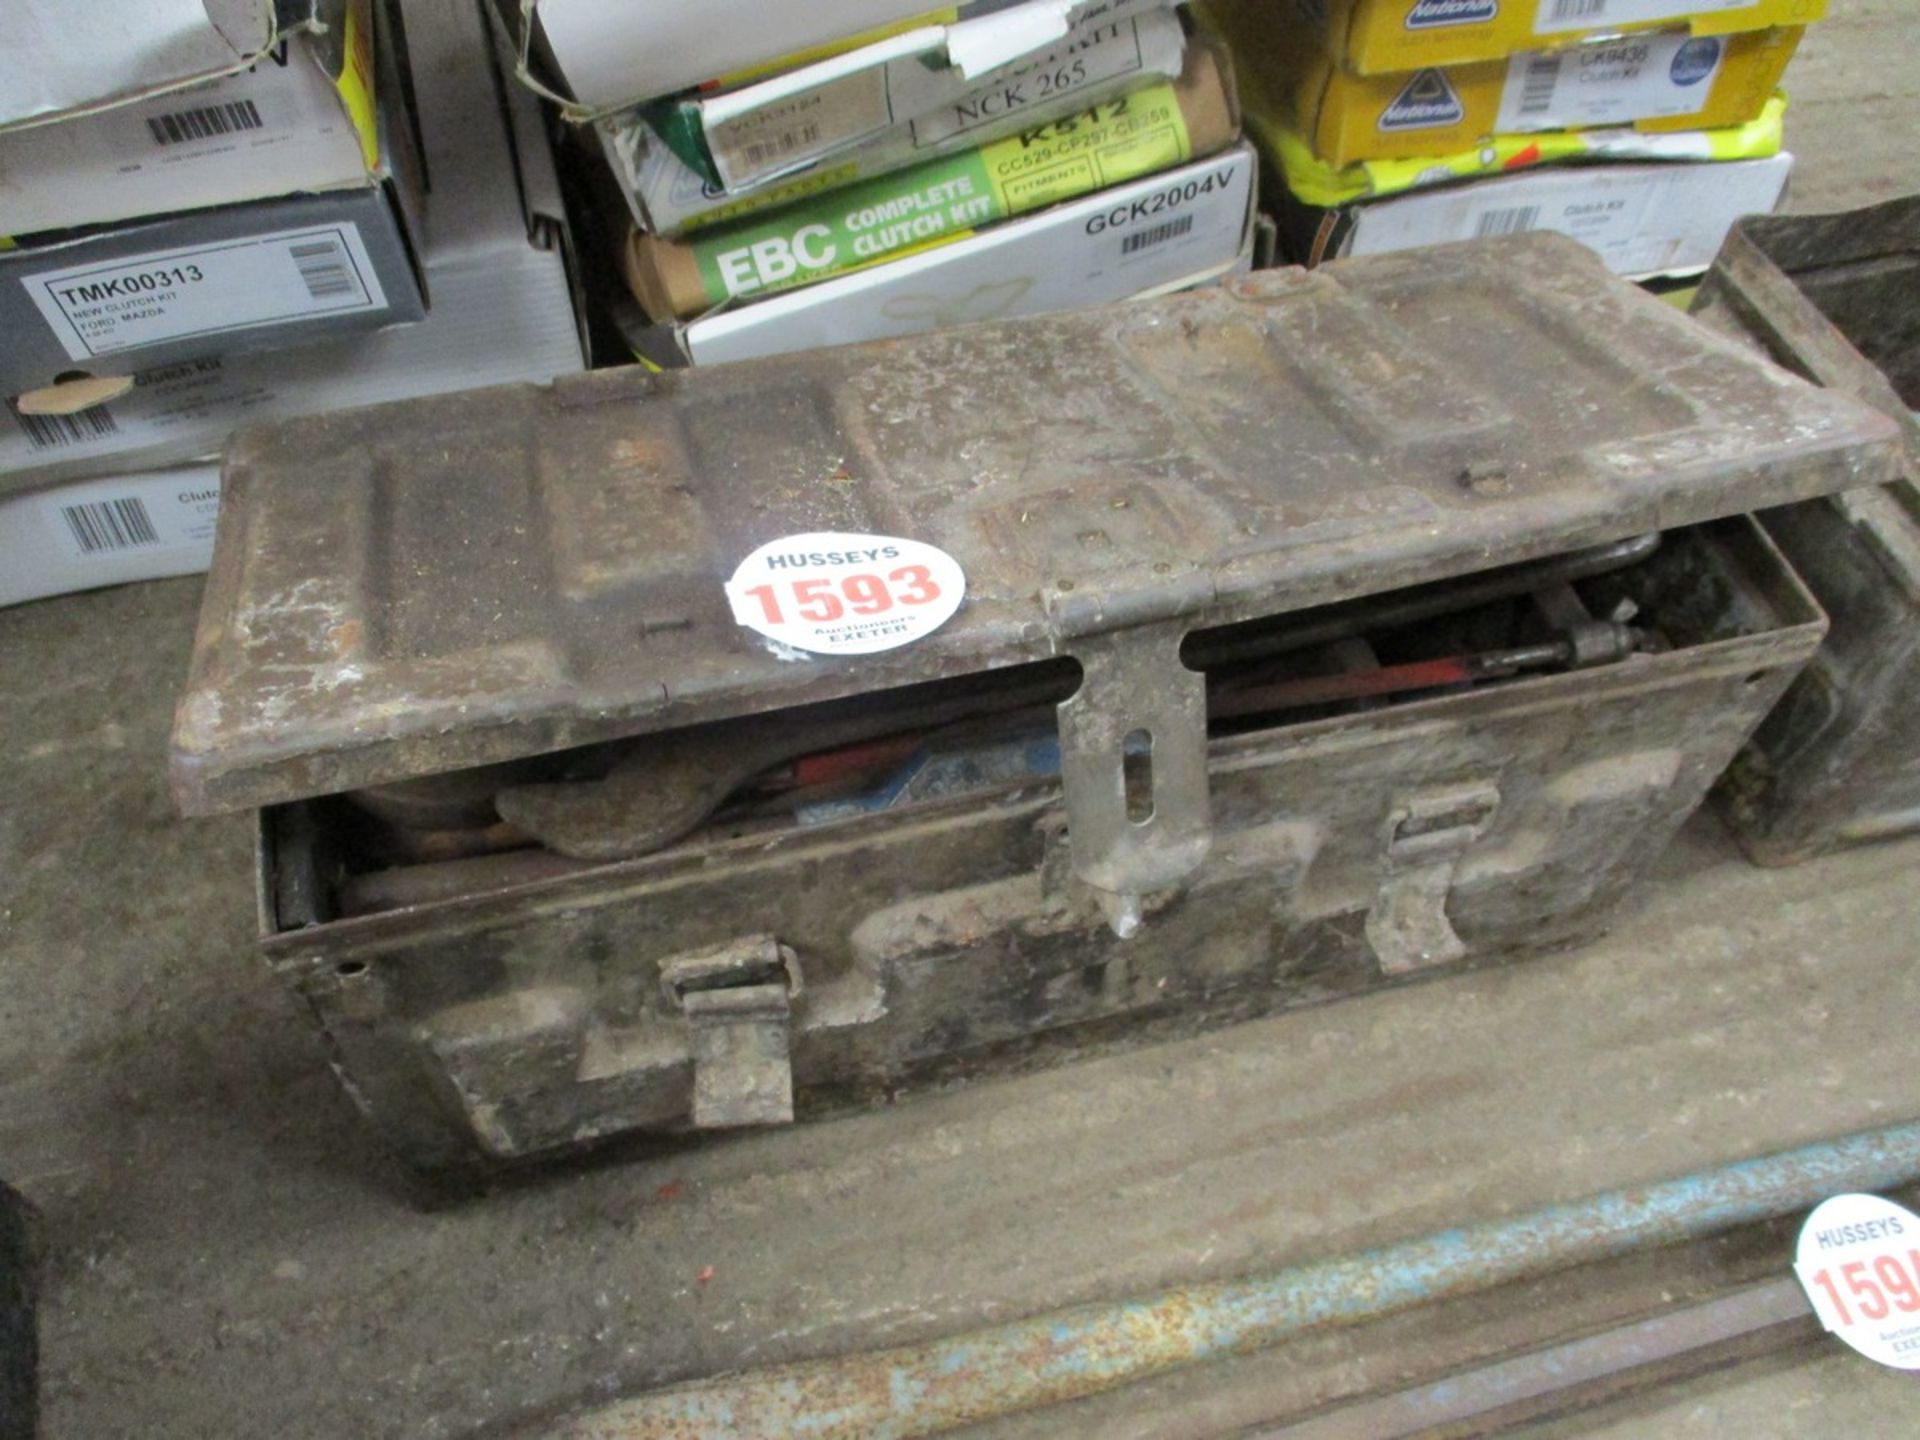 AMMO BOX FULL OF SPANNERS & TOOLS